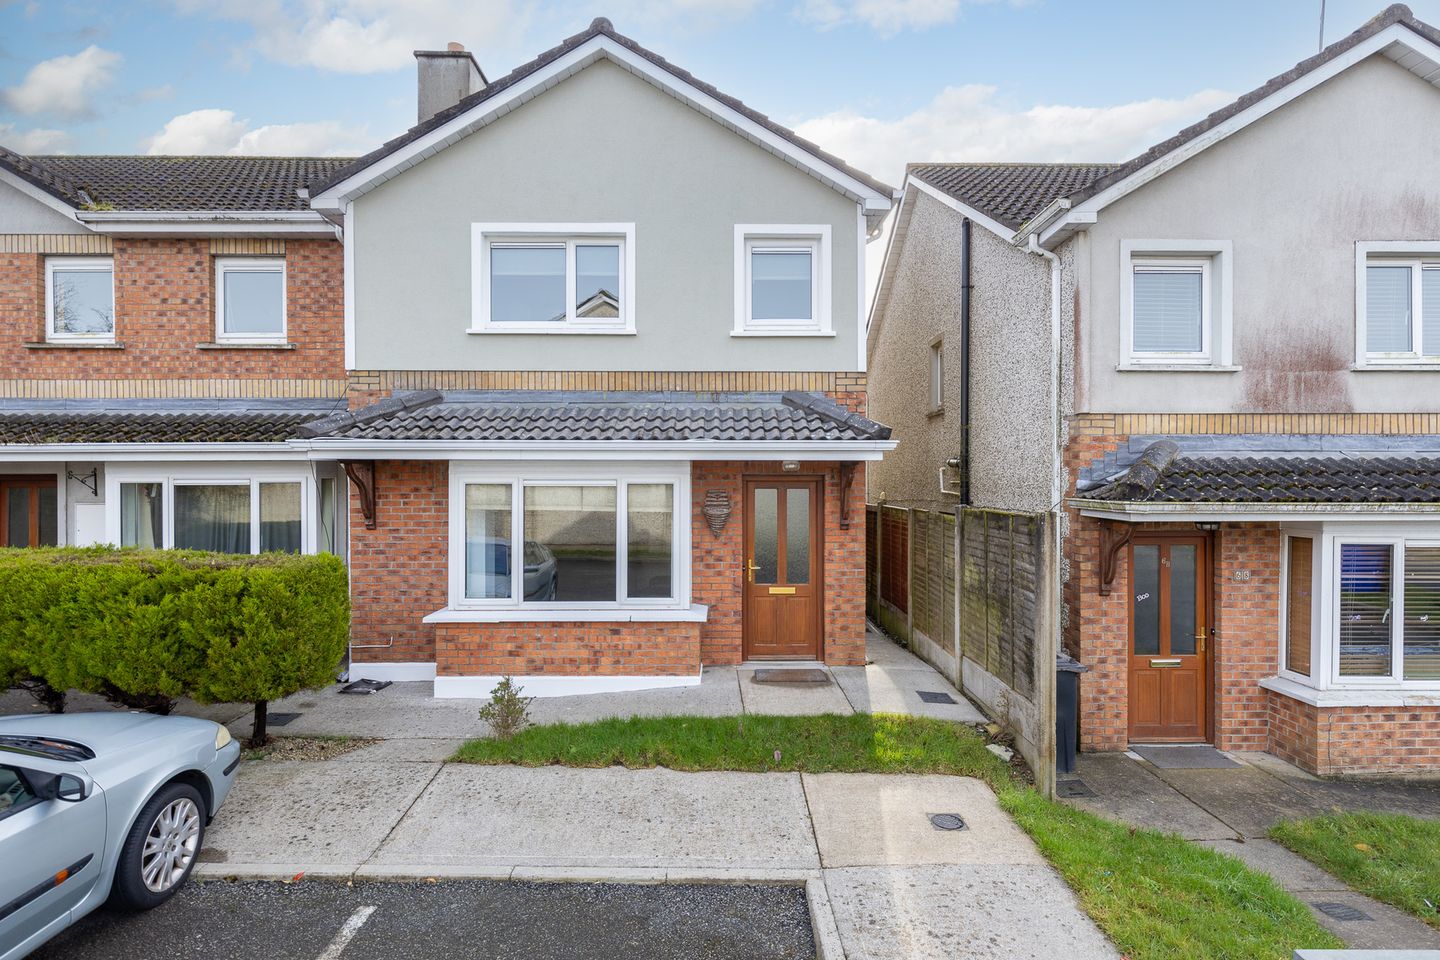 67 Brook Lawn, New Ross, Co. Wexford, Y34NY66